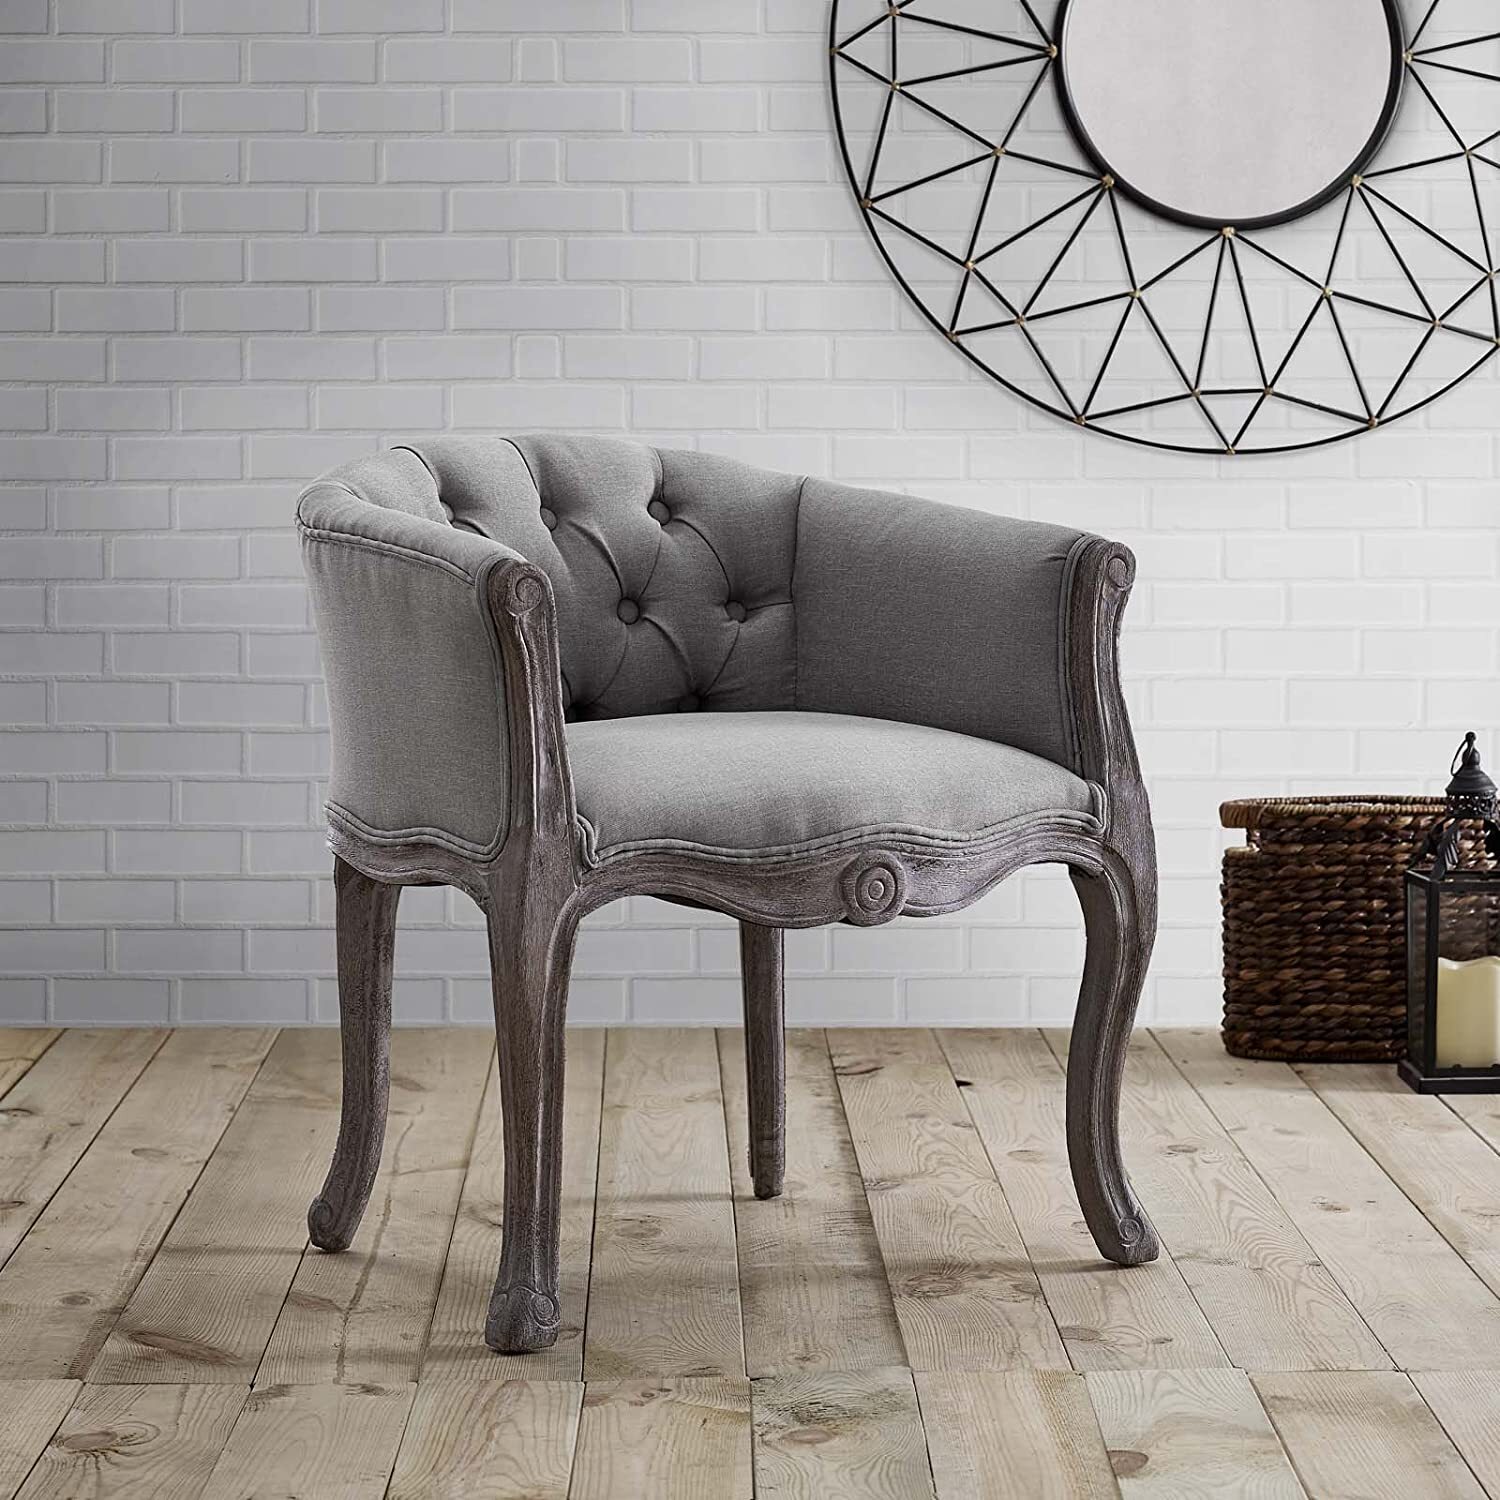 French country style chair for smaller living rooms